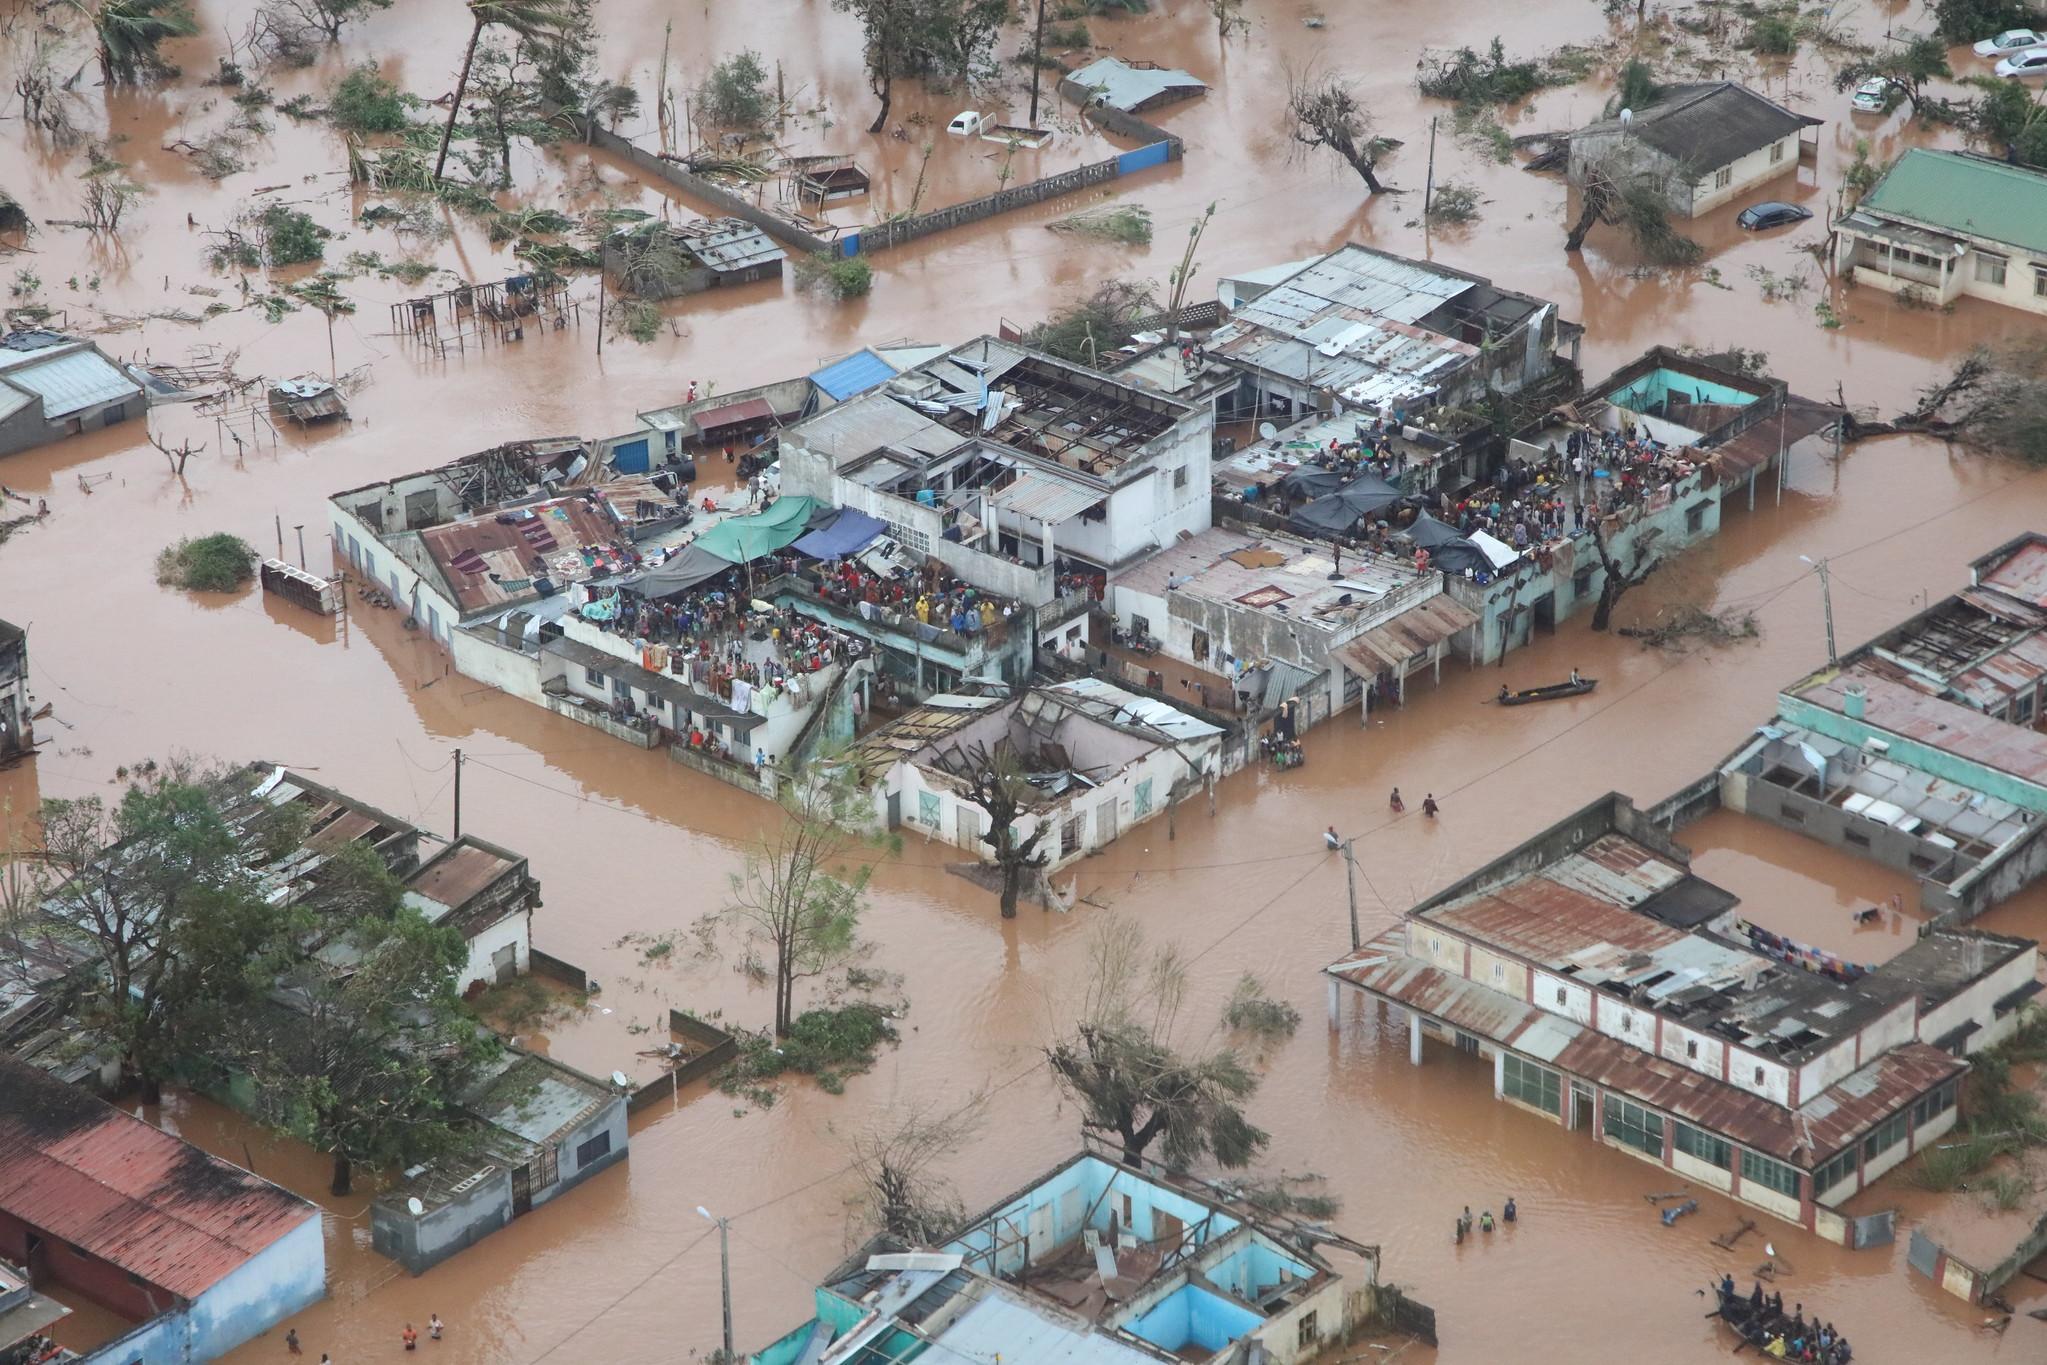 A new UN Technology Bank's initiative enhances geospatial technologies, which can be used in advance or post-disaster management in Mozambique.